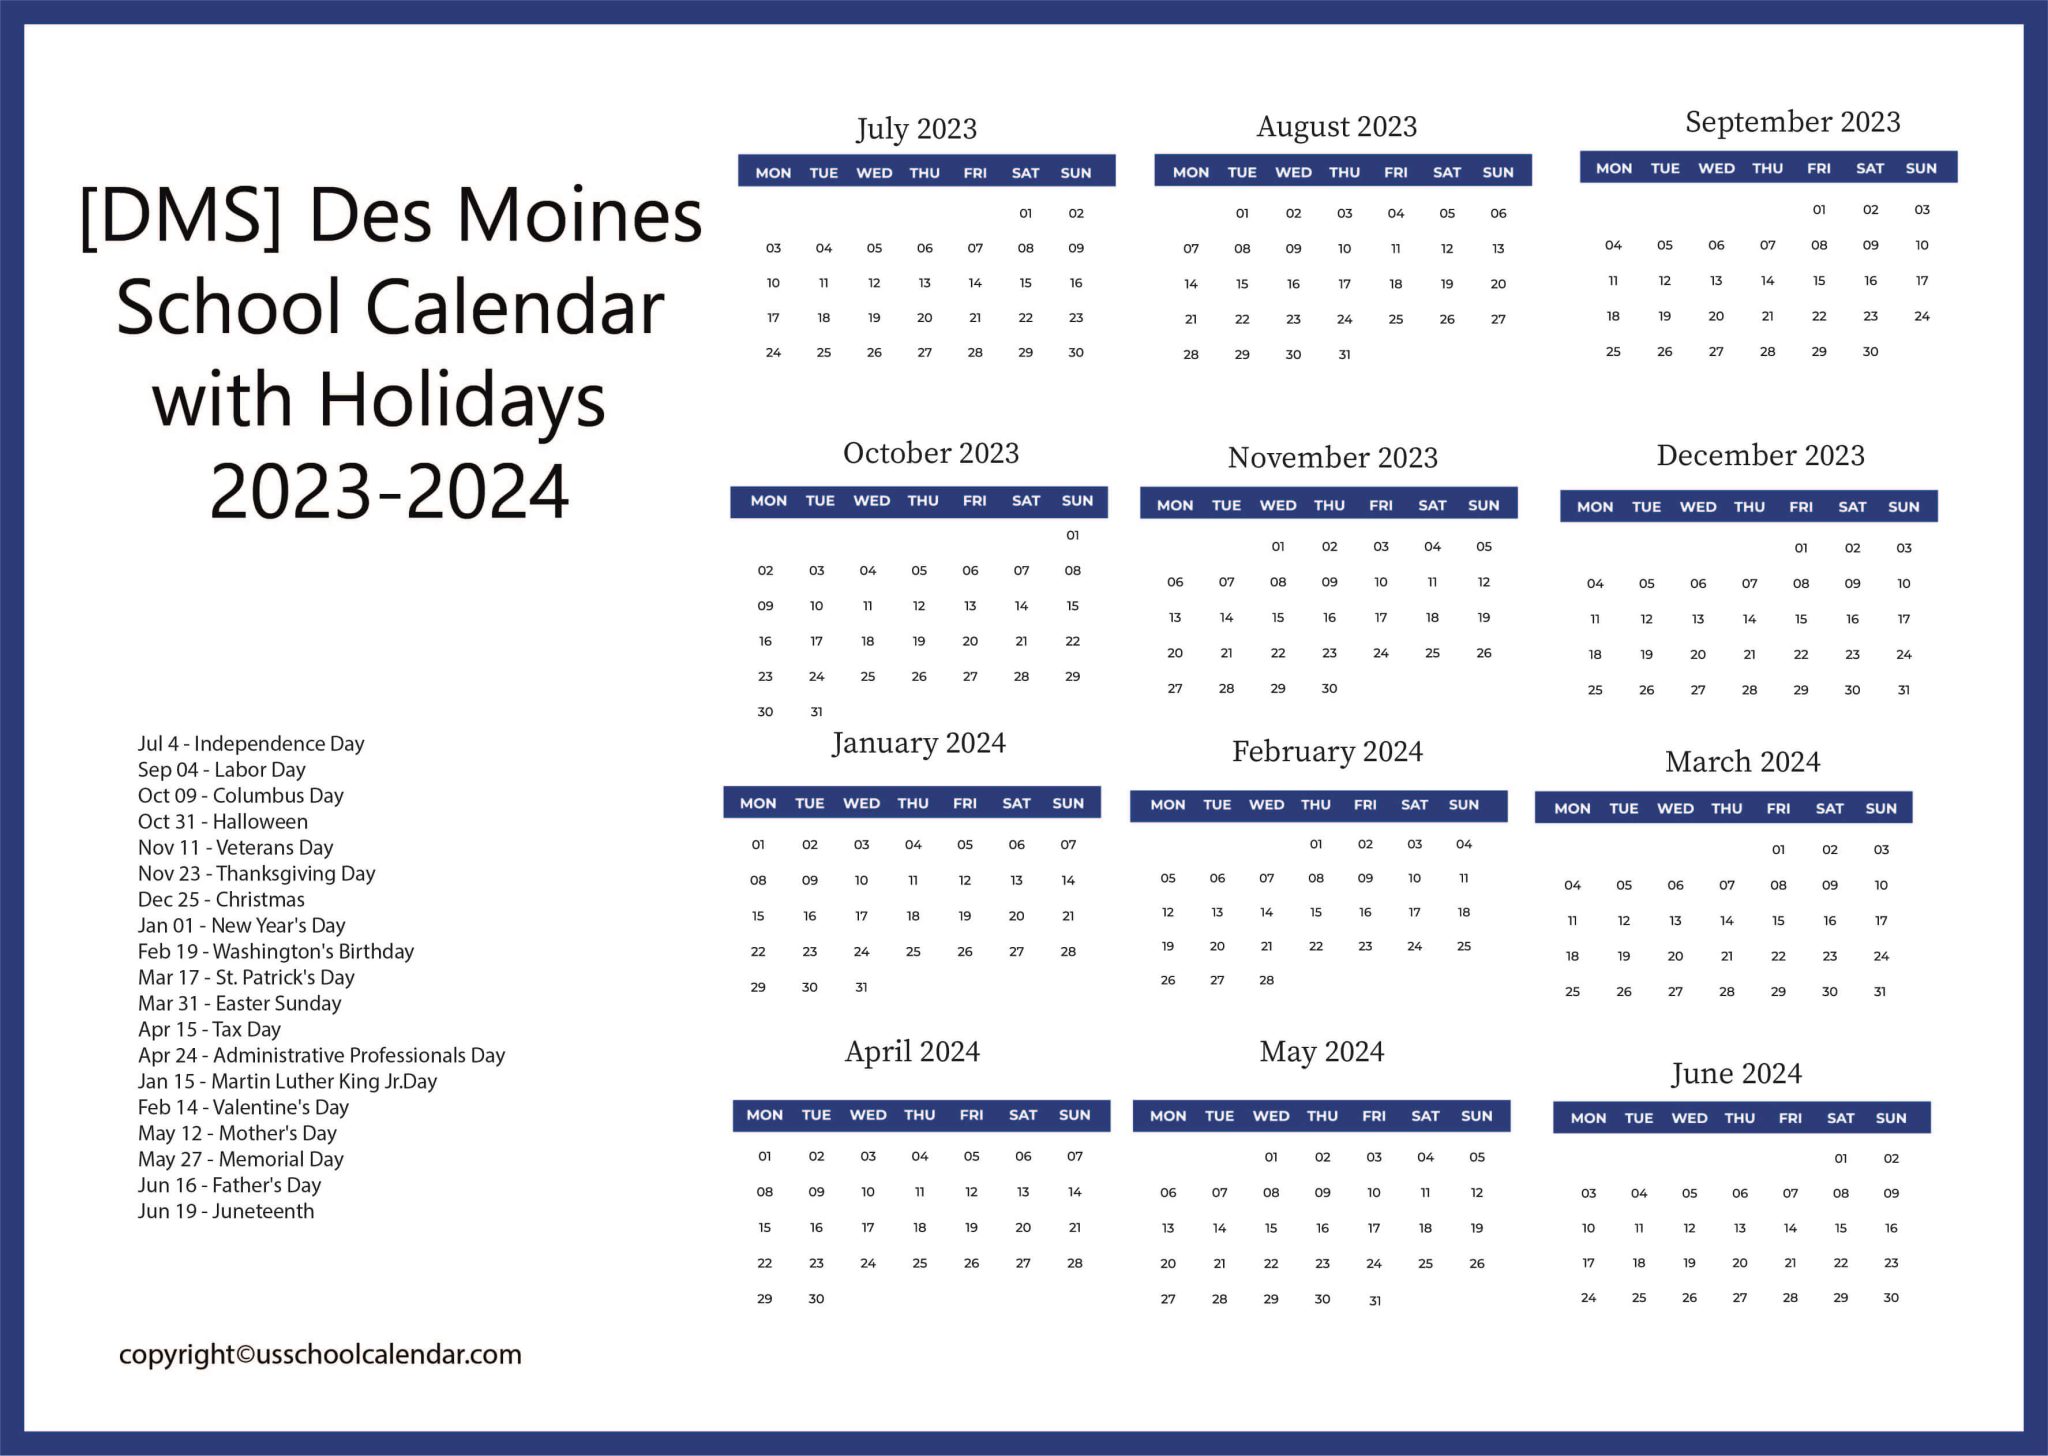 DMS Des Moines School Calendar with Holidays 2023 2024